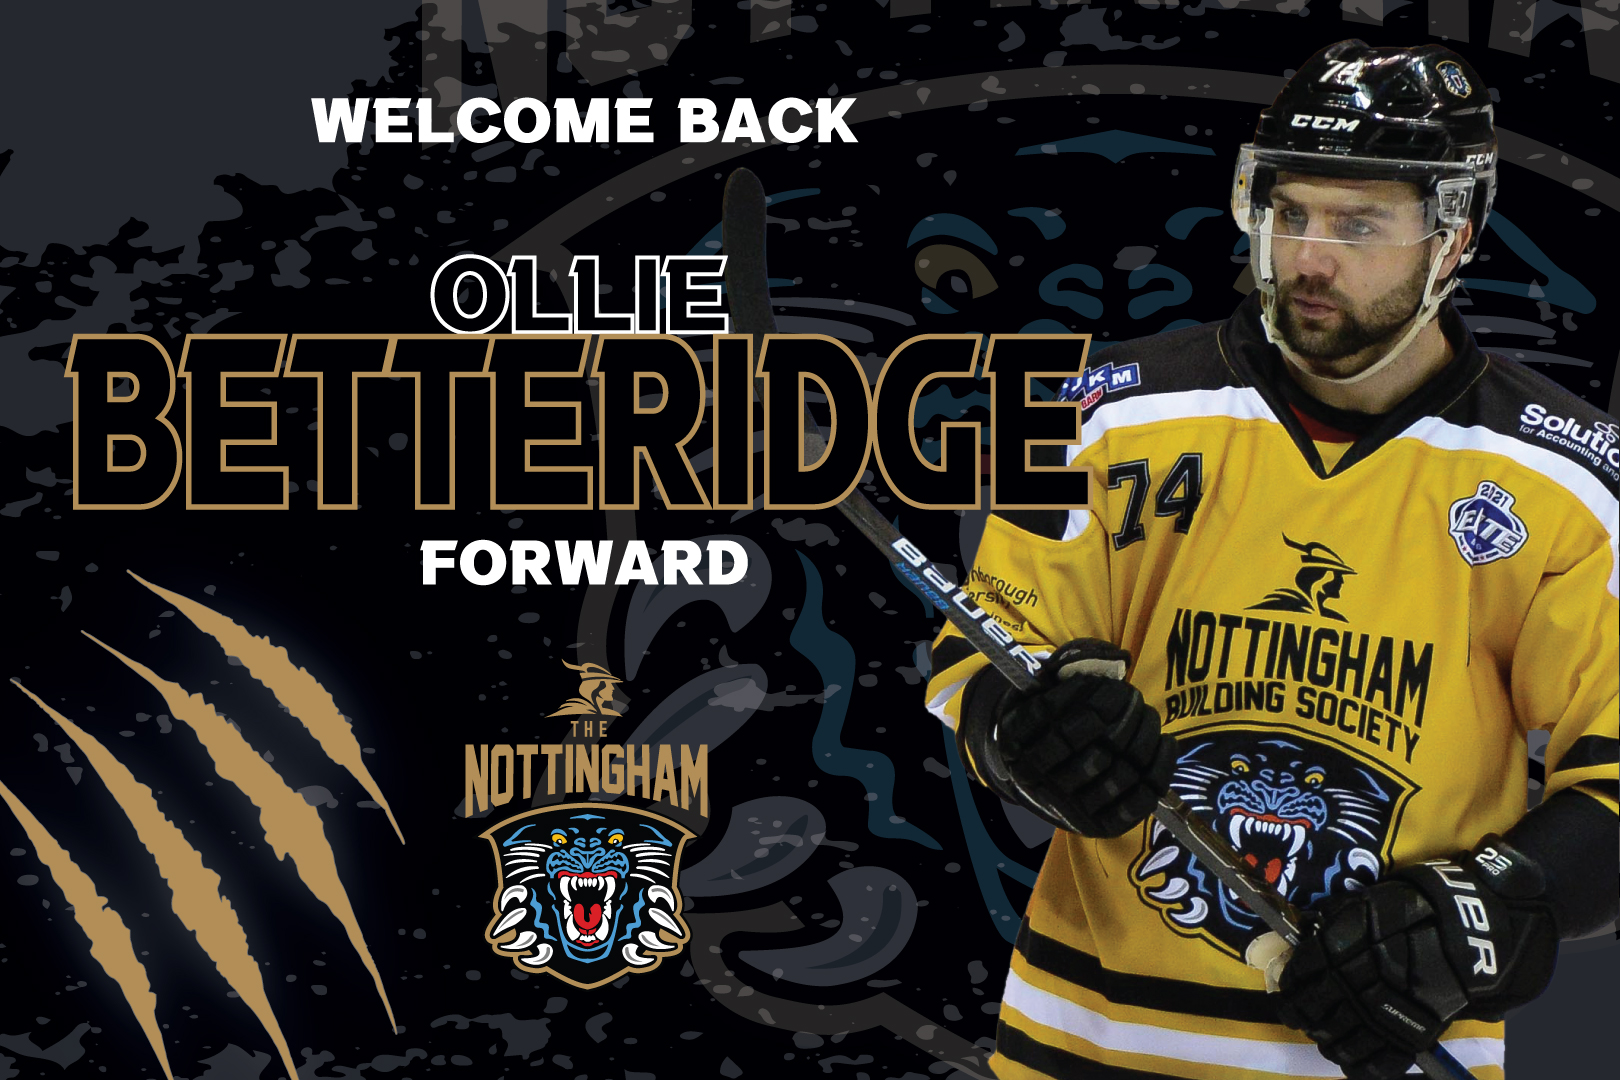 BETTERIDGE RETURNS HOME TO THE PANTHERS Top Image